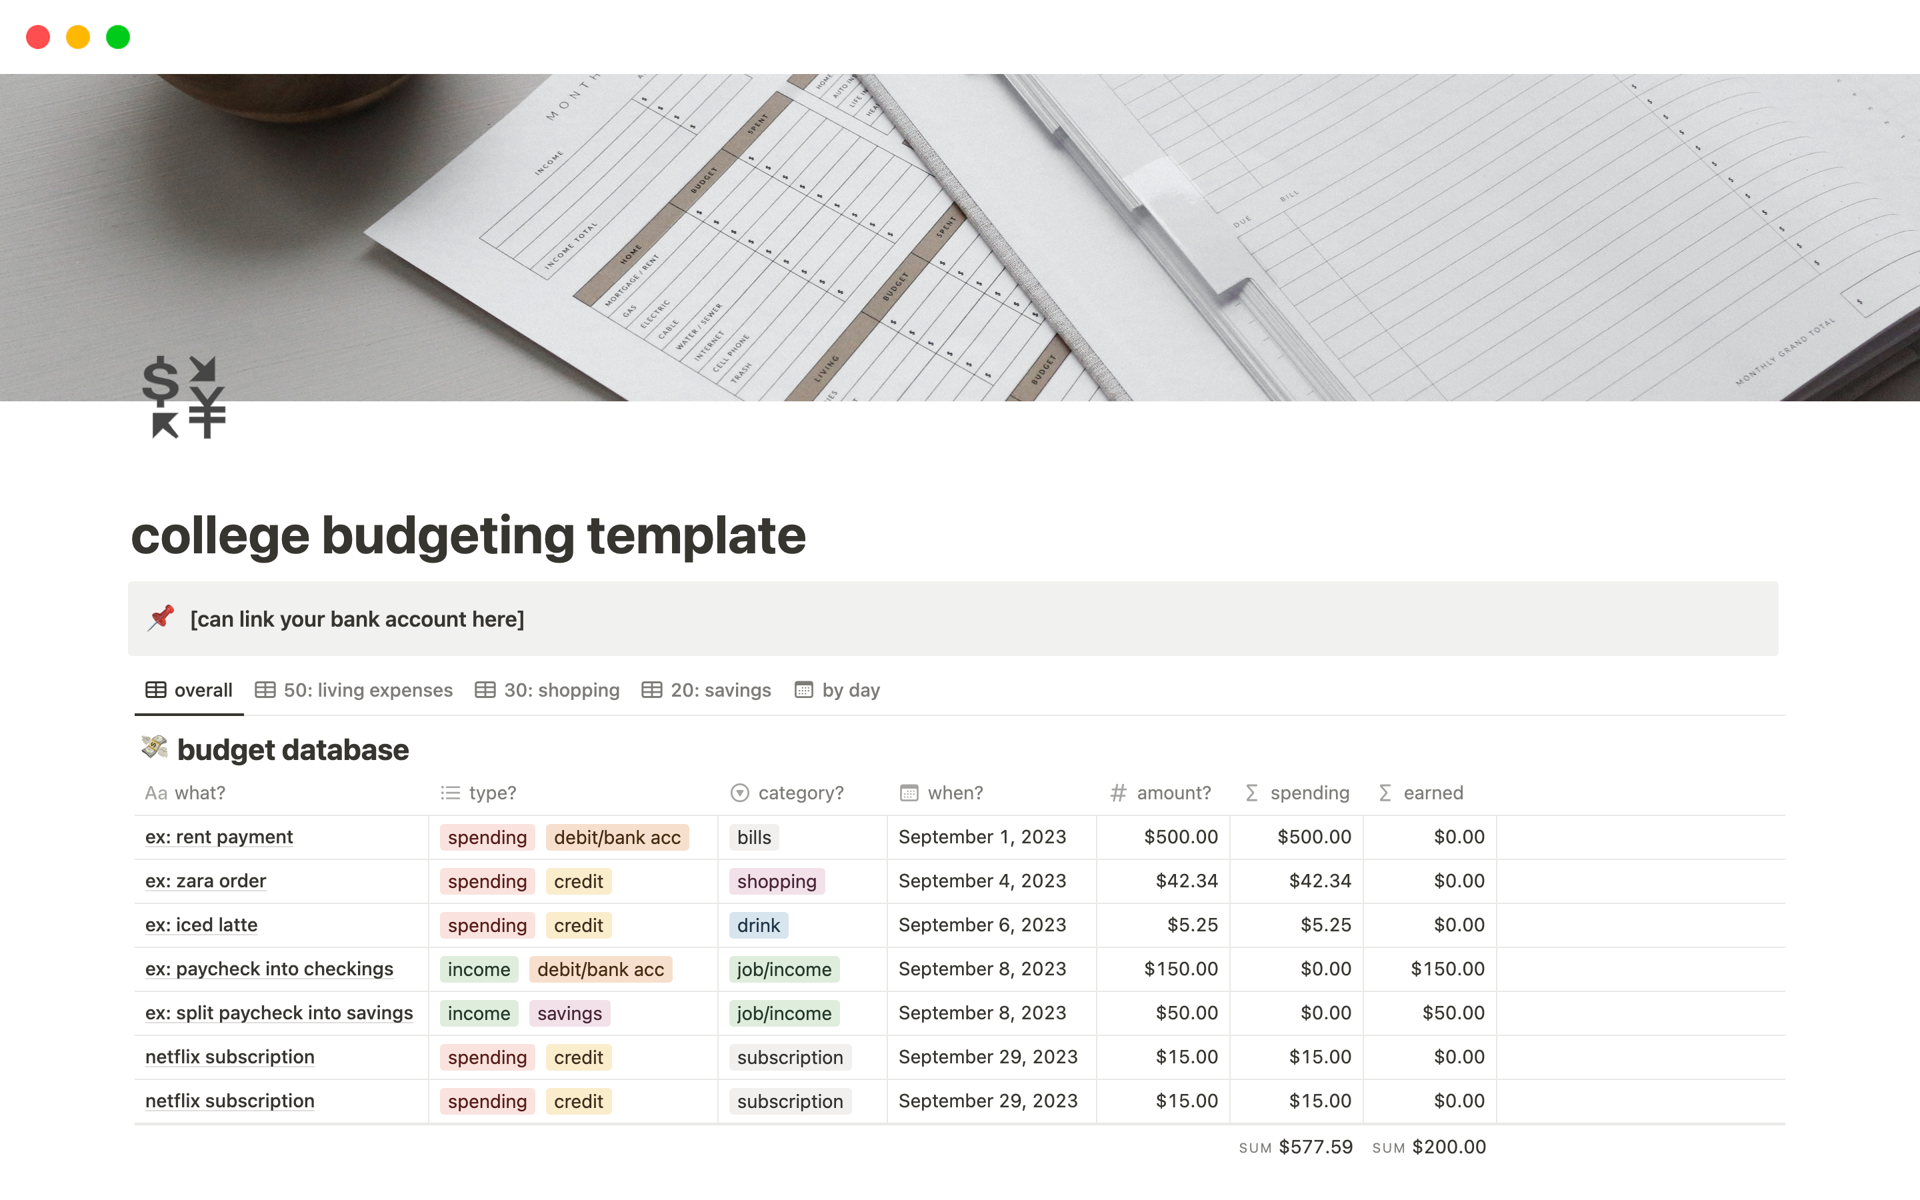 beginner budgeting database for college students!